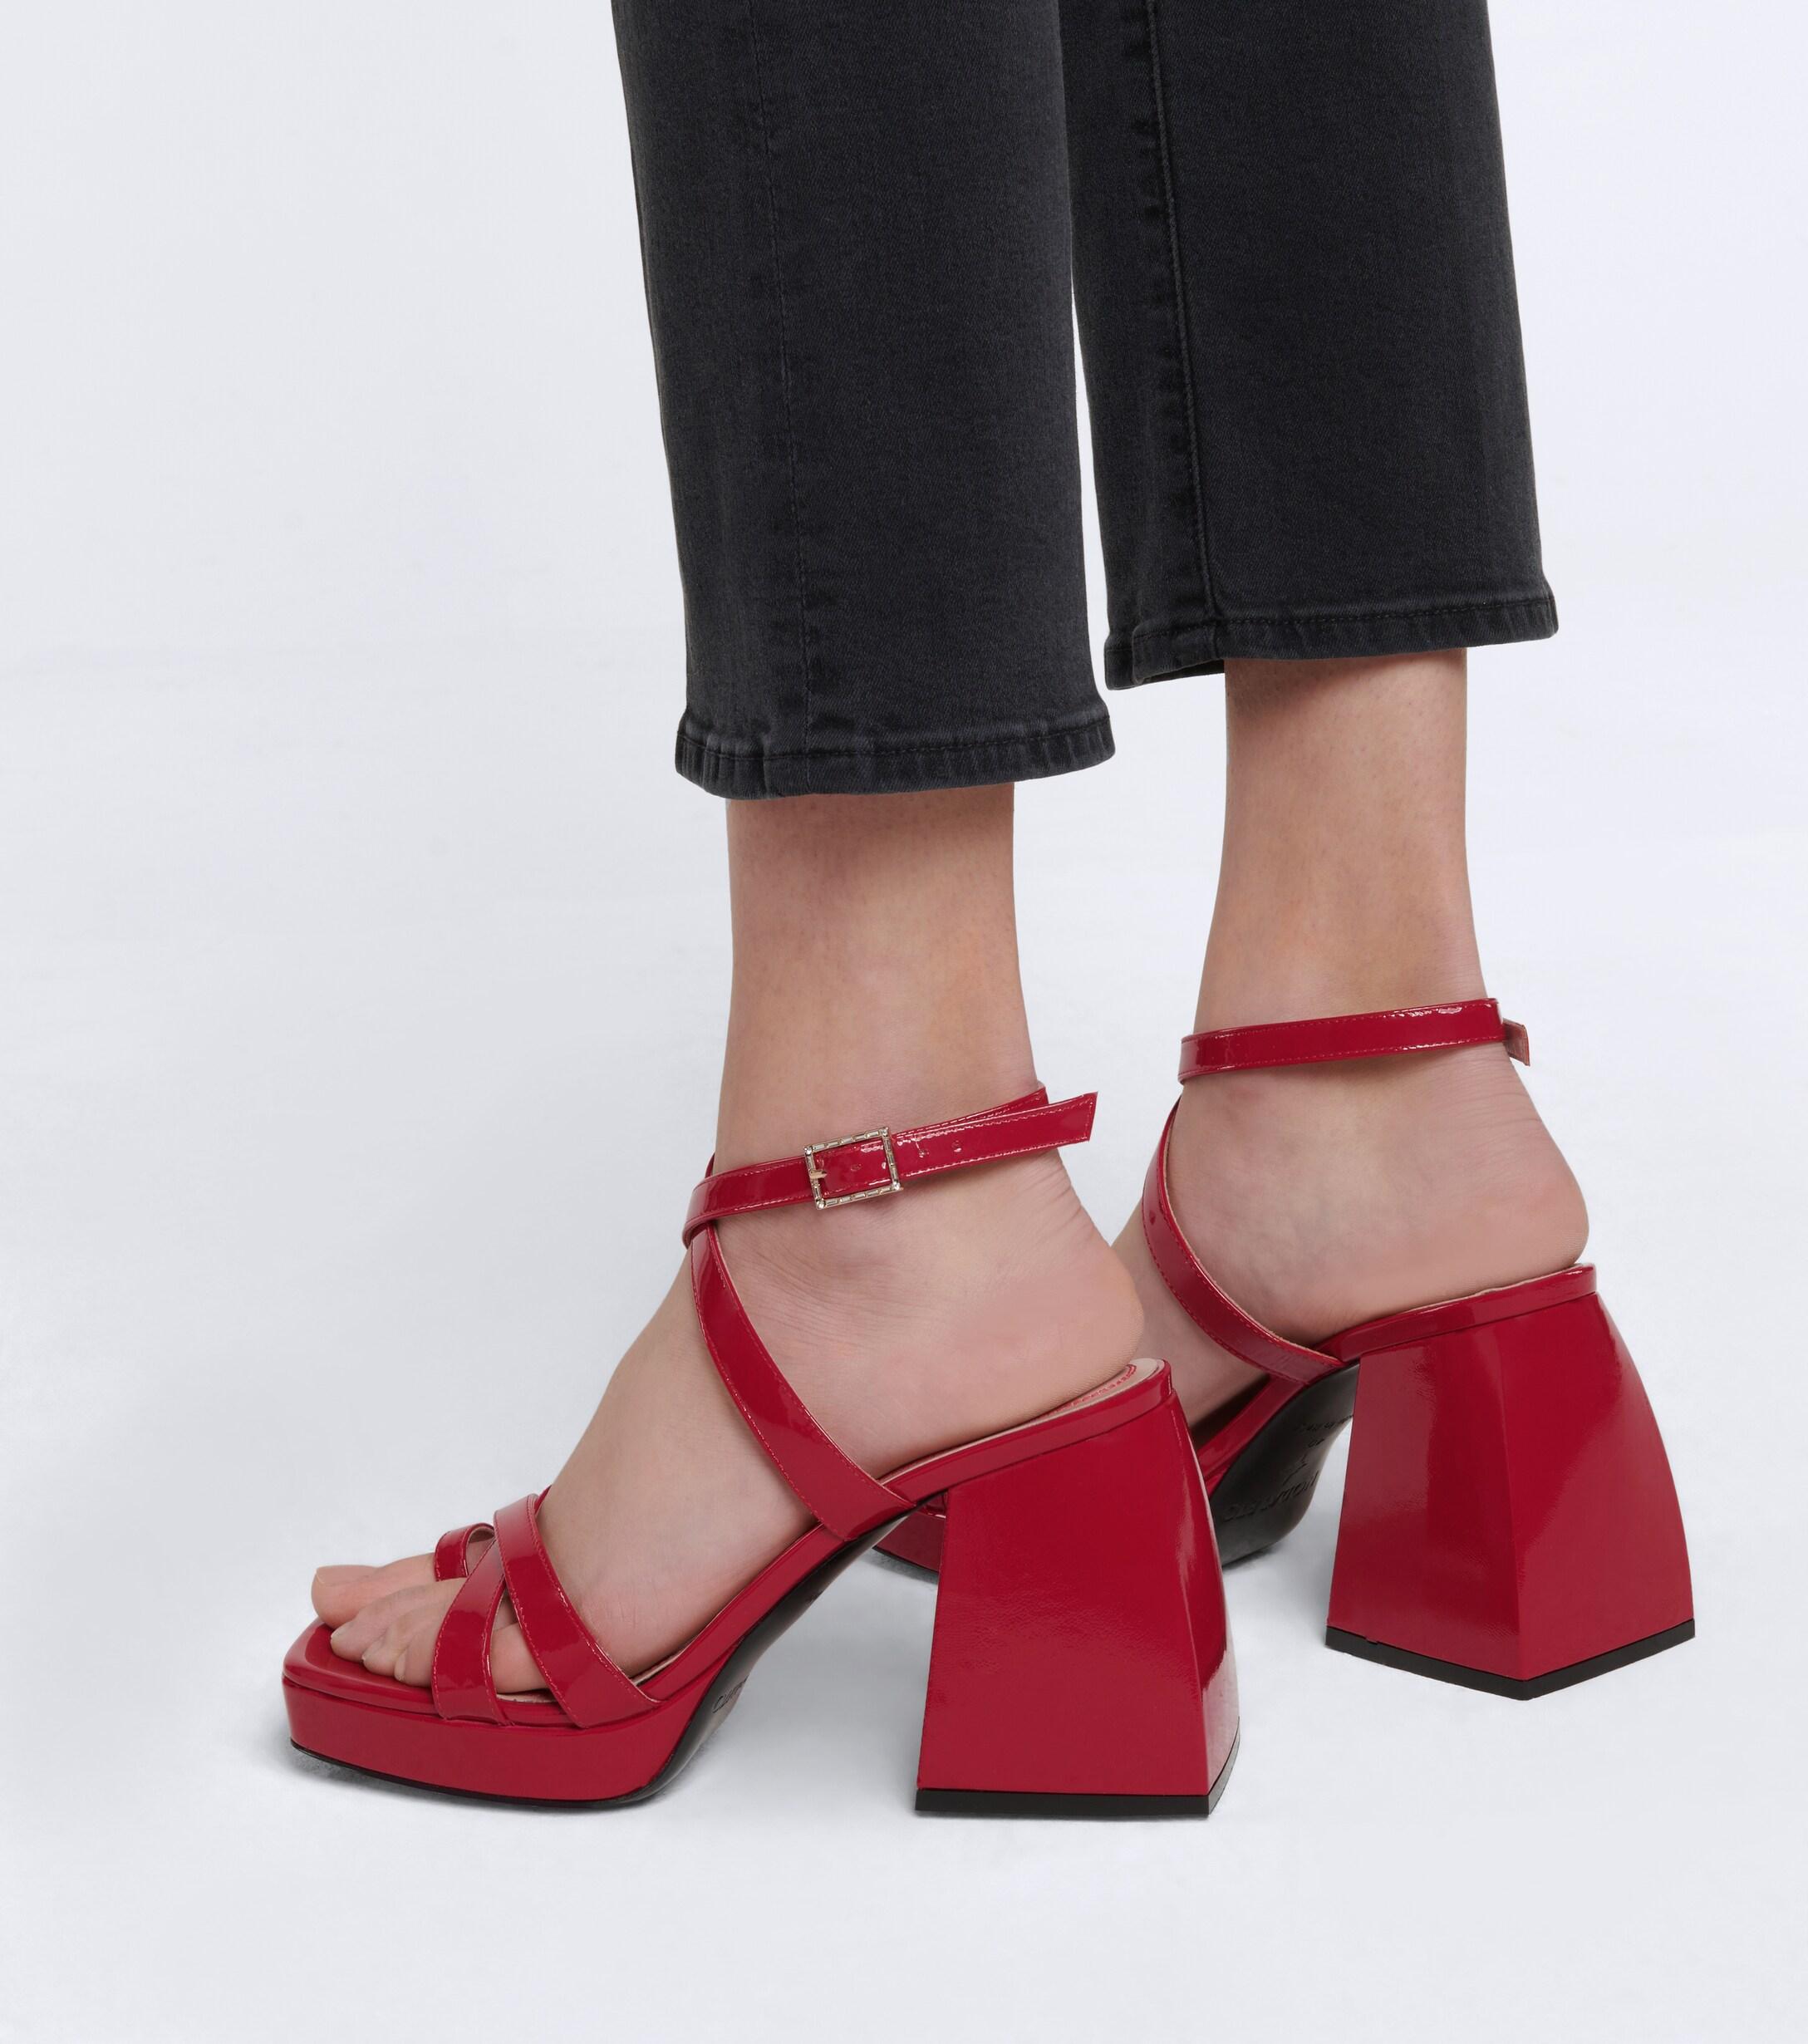 NODALETO Bulla Siler Patent Leather Sandals in Red | Lyst